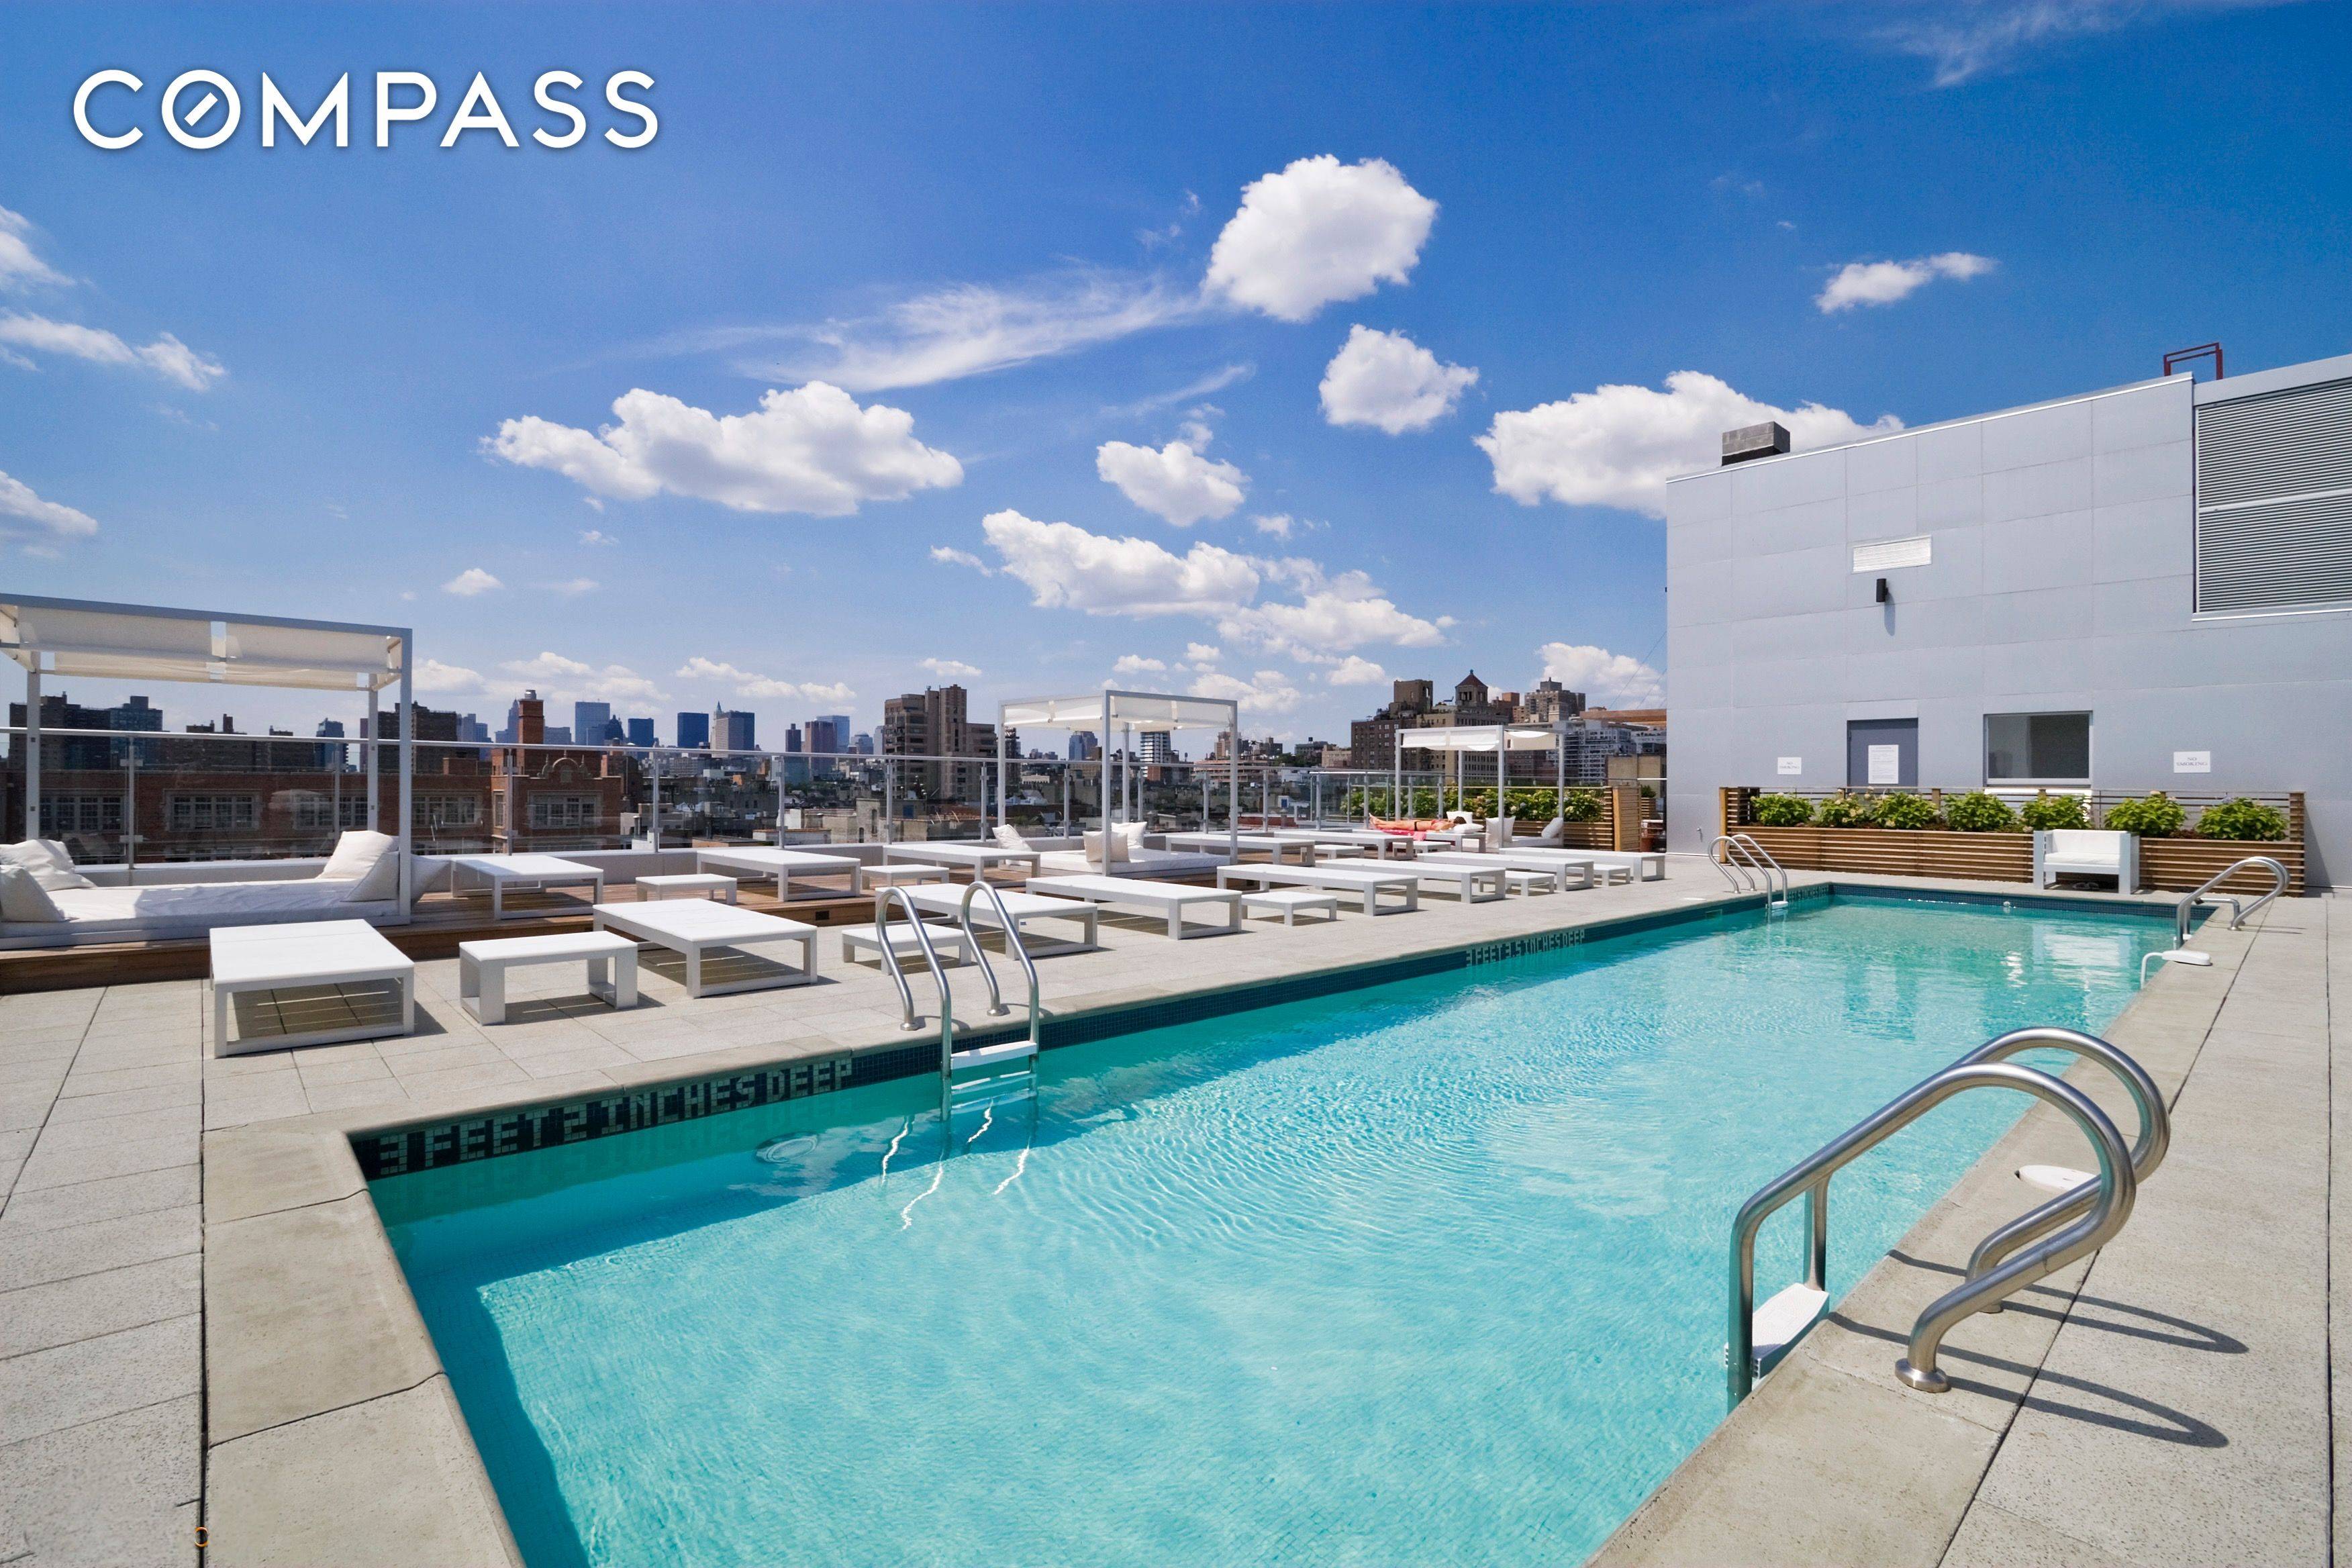 Visually Seductive Alcove Studio The A Building is a Full service Condominium with a 24 hour Doorman and Concierge, Engaging Rooftop Pool complete with Panoramic Views, Private Cabanas, BBQ Grill ...